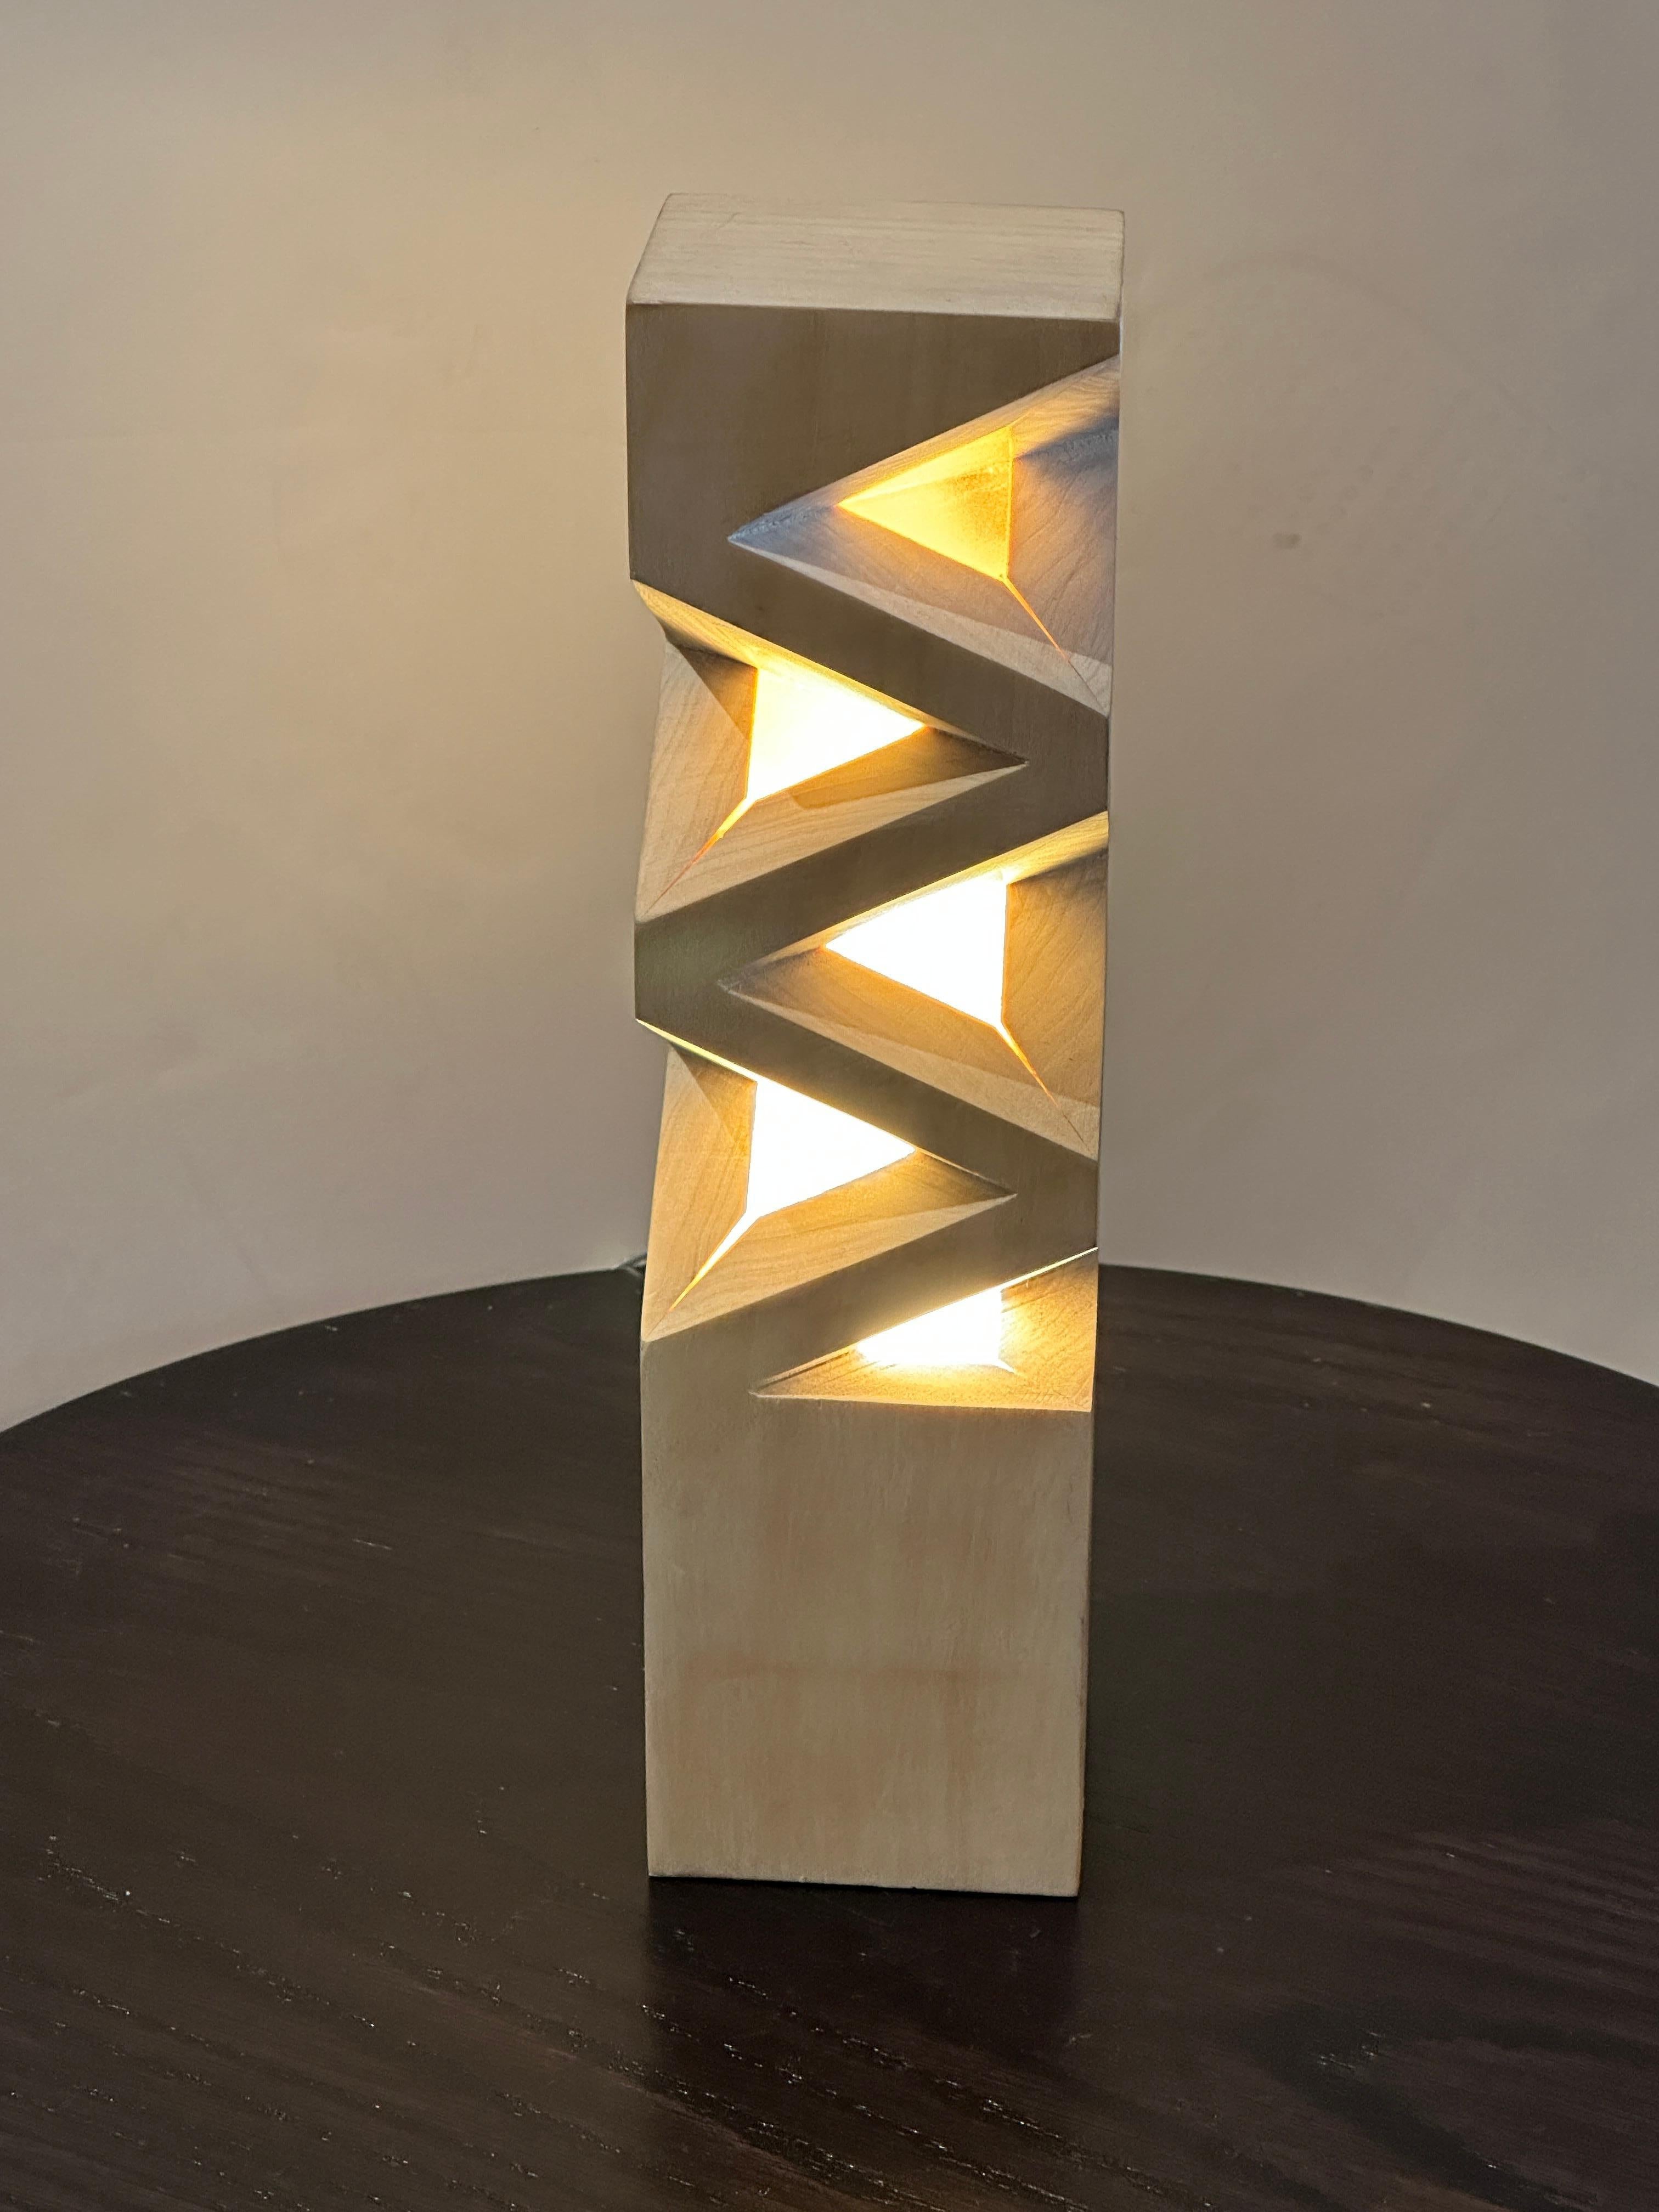 This modern Minimalist geometric natural wood table lamp features three tetrahedron shapes carved on two sides and two tetrahedron shapes on the other two sides. Crafted from light-colored wood filled with resin to spread the light, the geometric